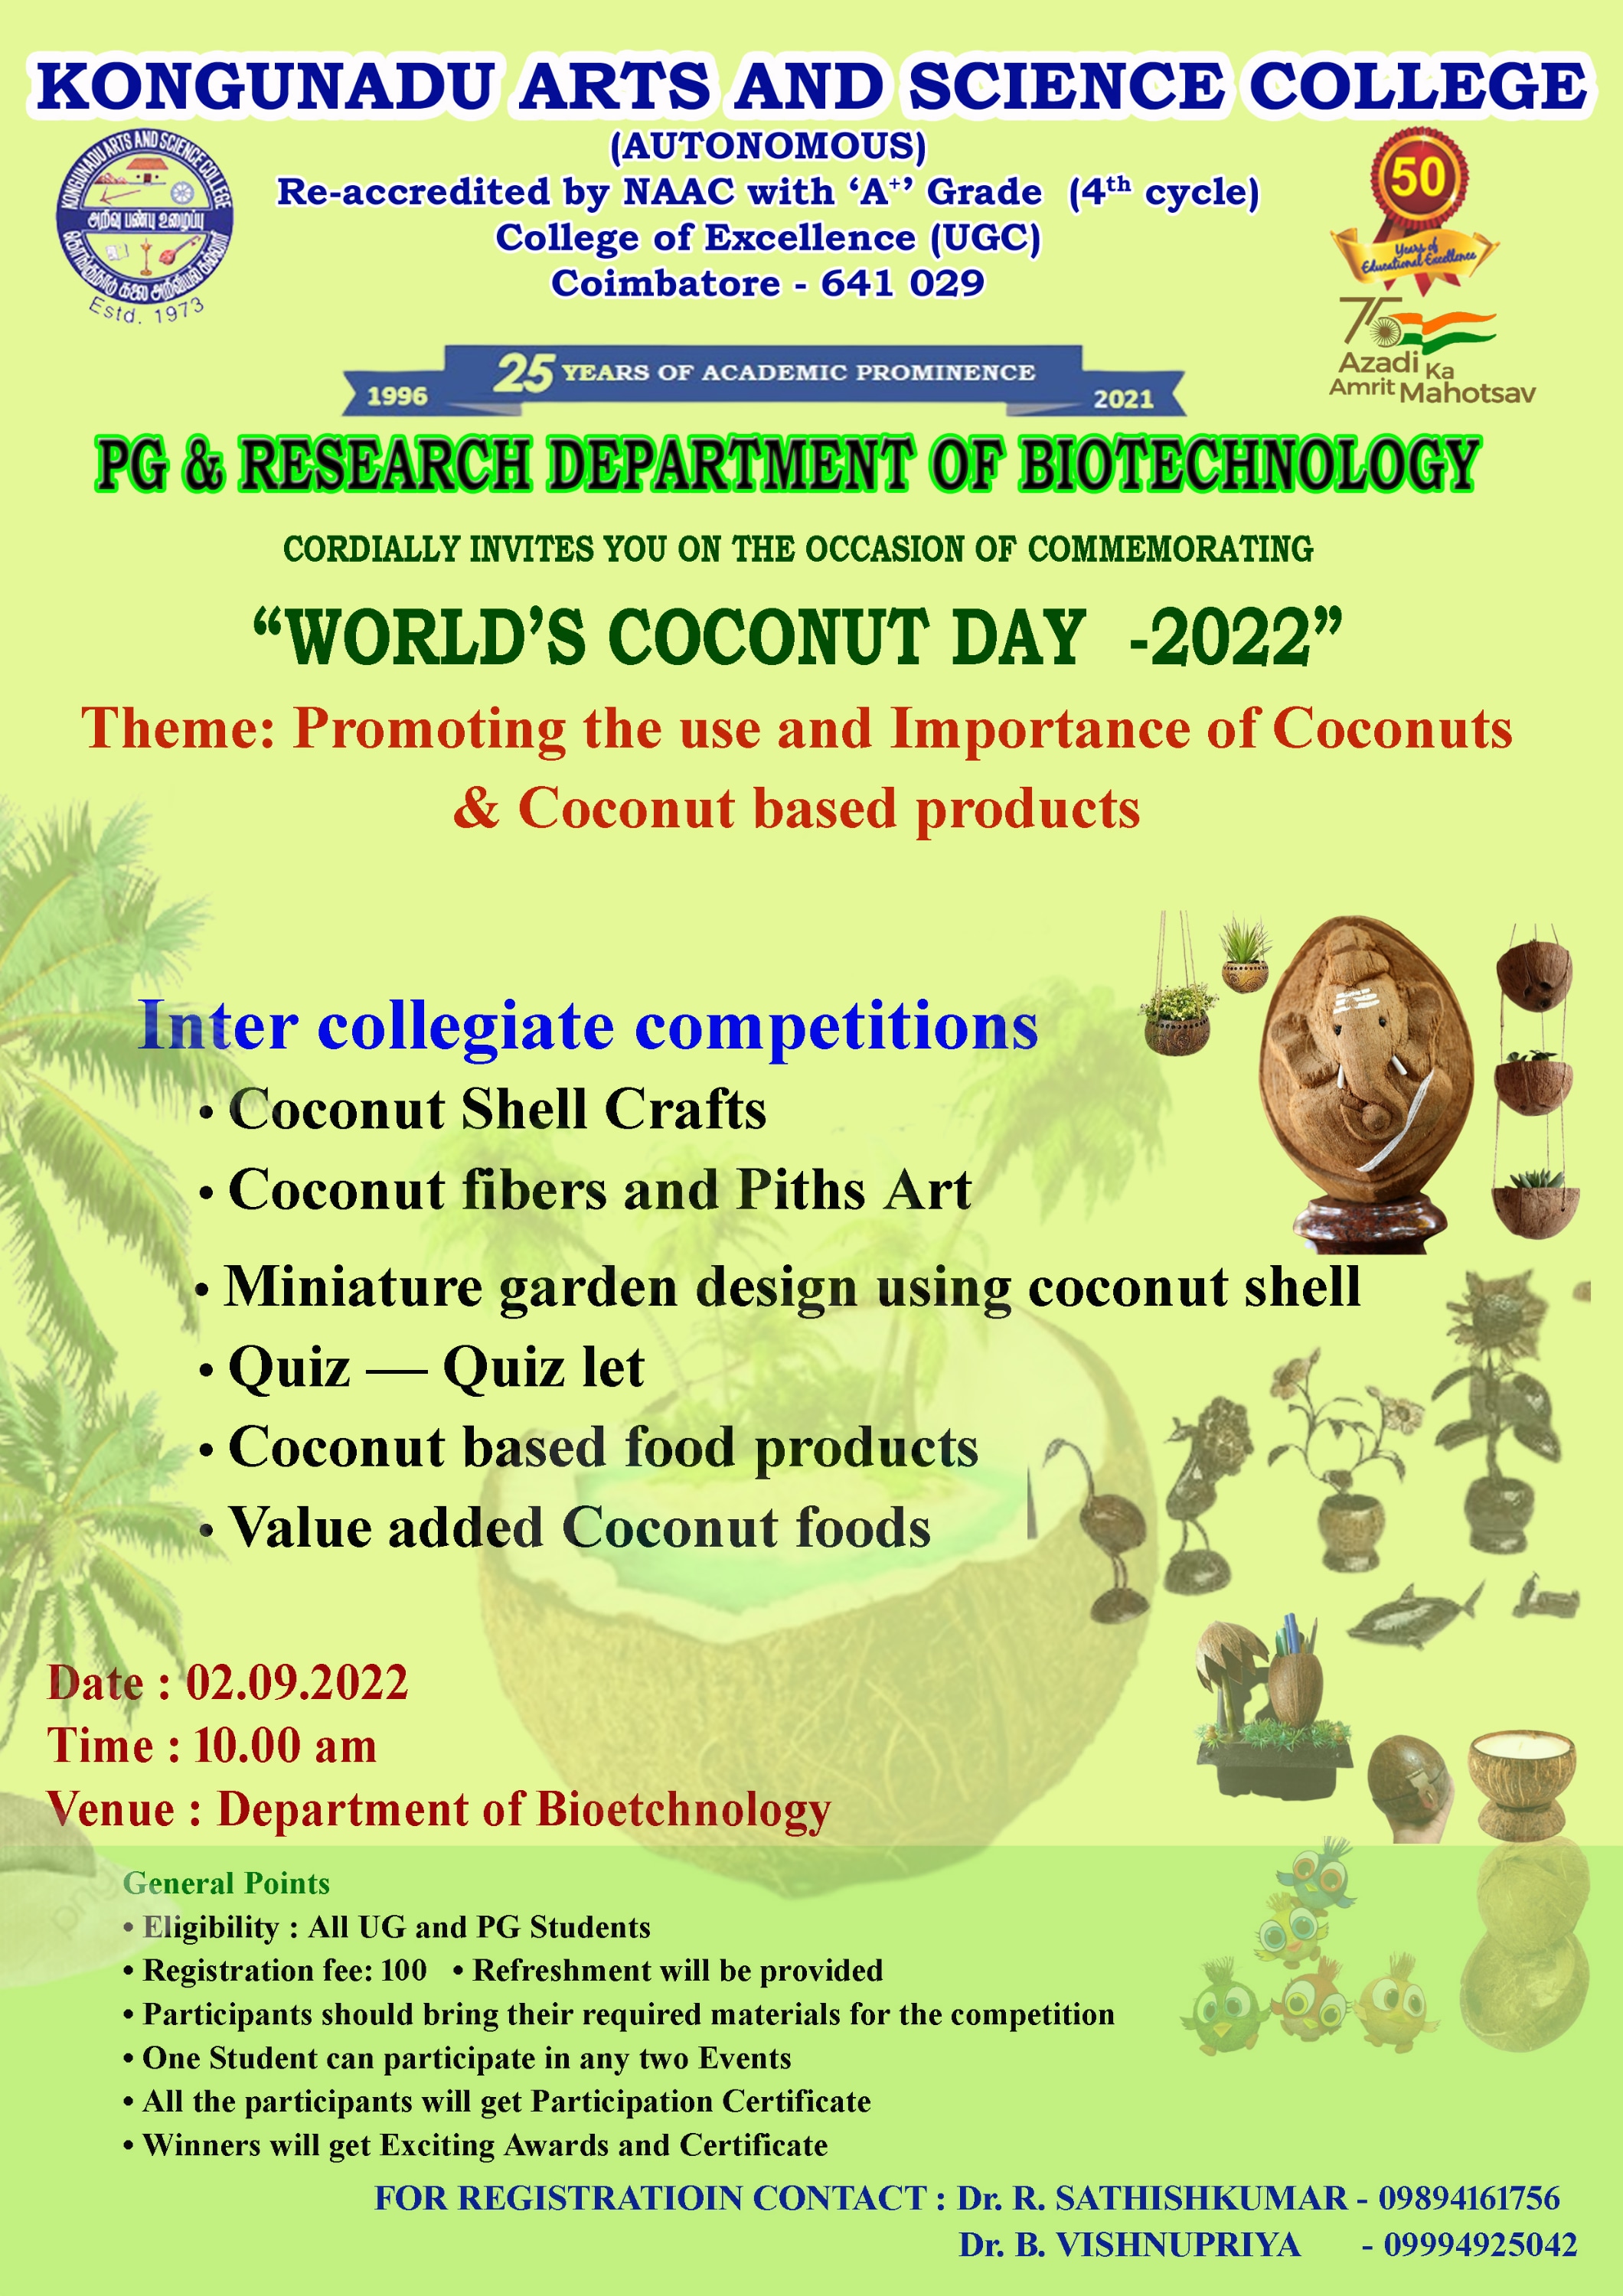 " PG & RESEARCH DEPARTMENT OF BIOTECHNOLOGY CORDIALLY INVITES YOU FOR THE EVENT ON THE OCCASION OF COMMEMORATING “WORLD’S COCONUT DAY -2022”.   “INTER COLLEGIATE COMPETITIONS”